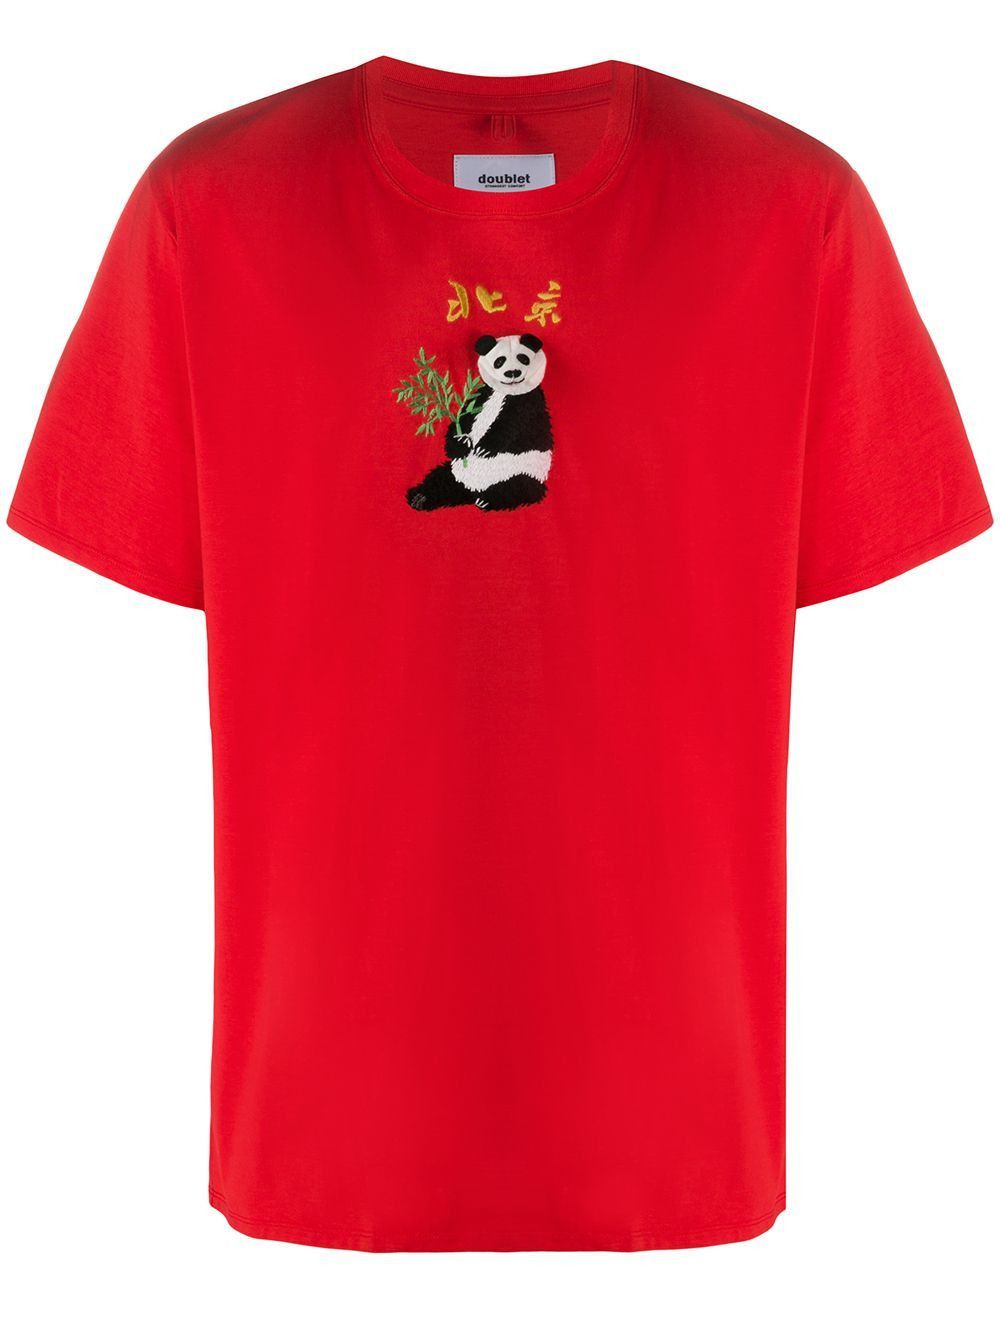 Doublet Doublet Embroidery Panda Puppet T-shirt | Grailed